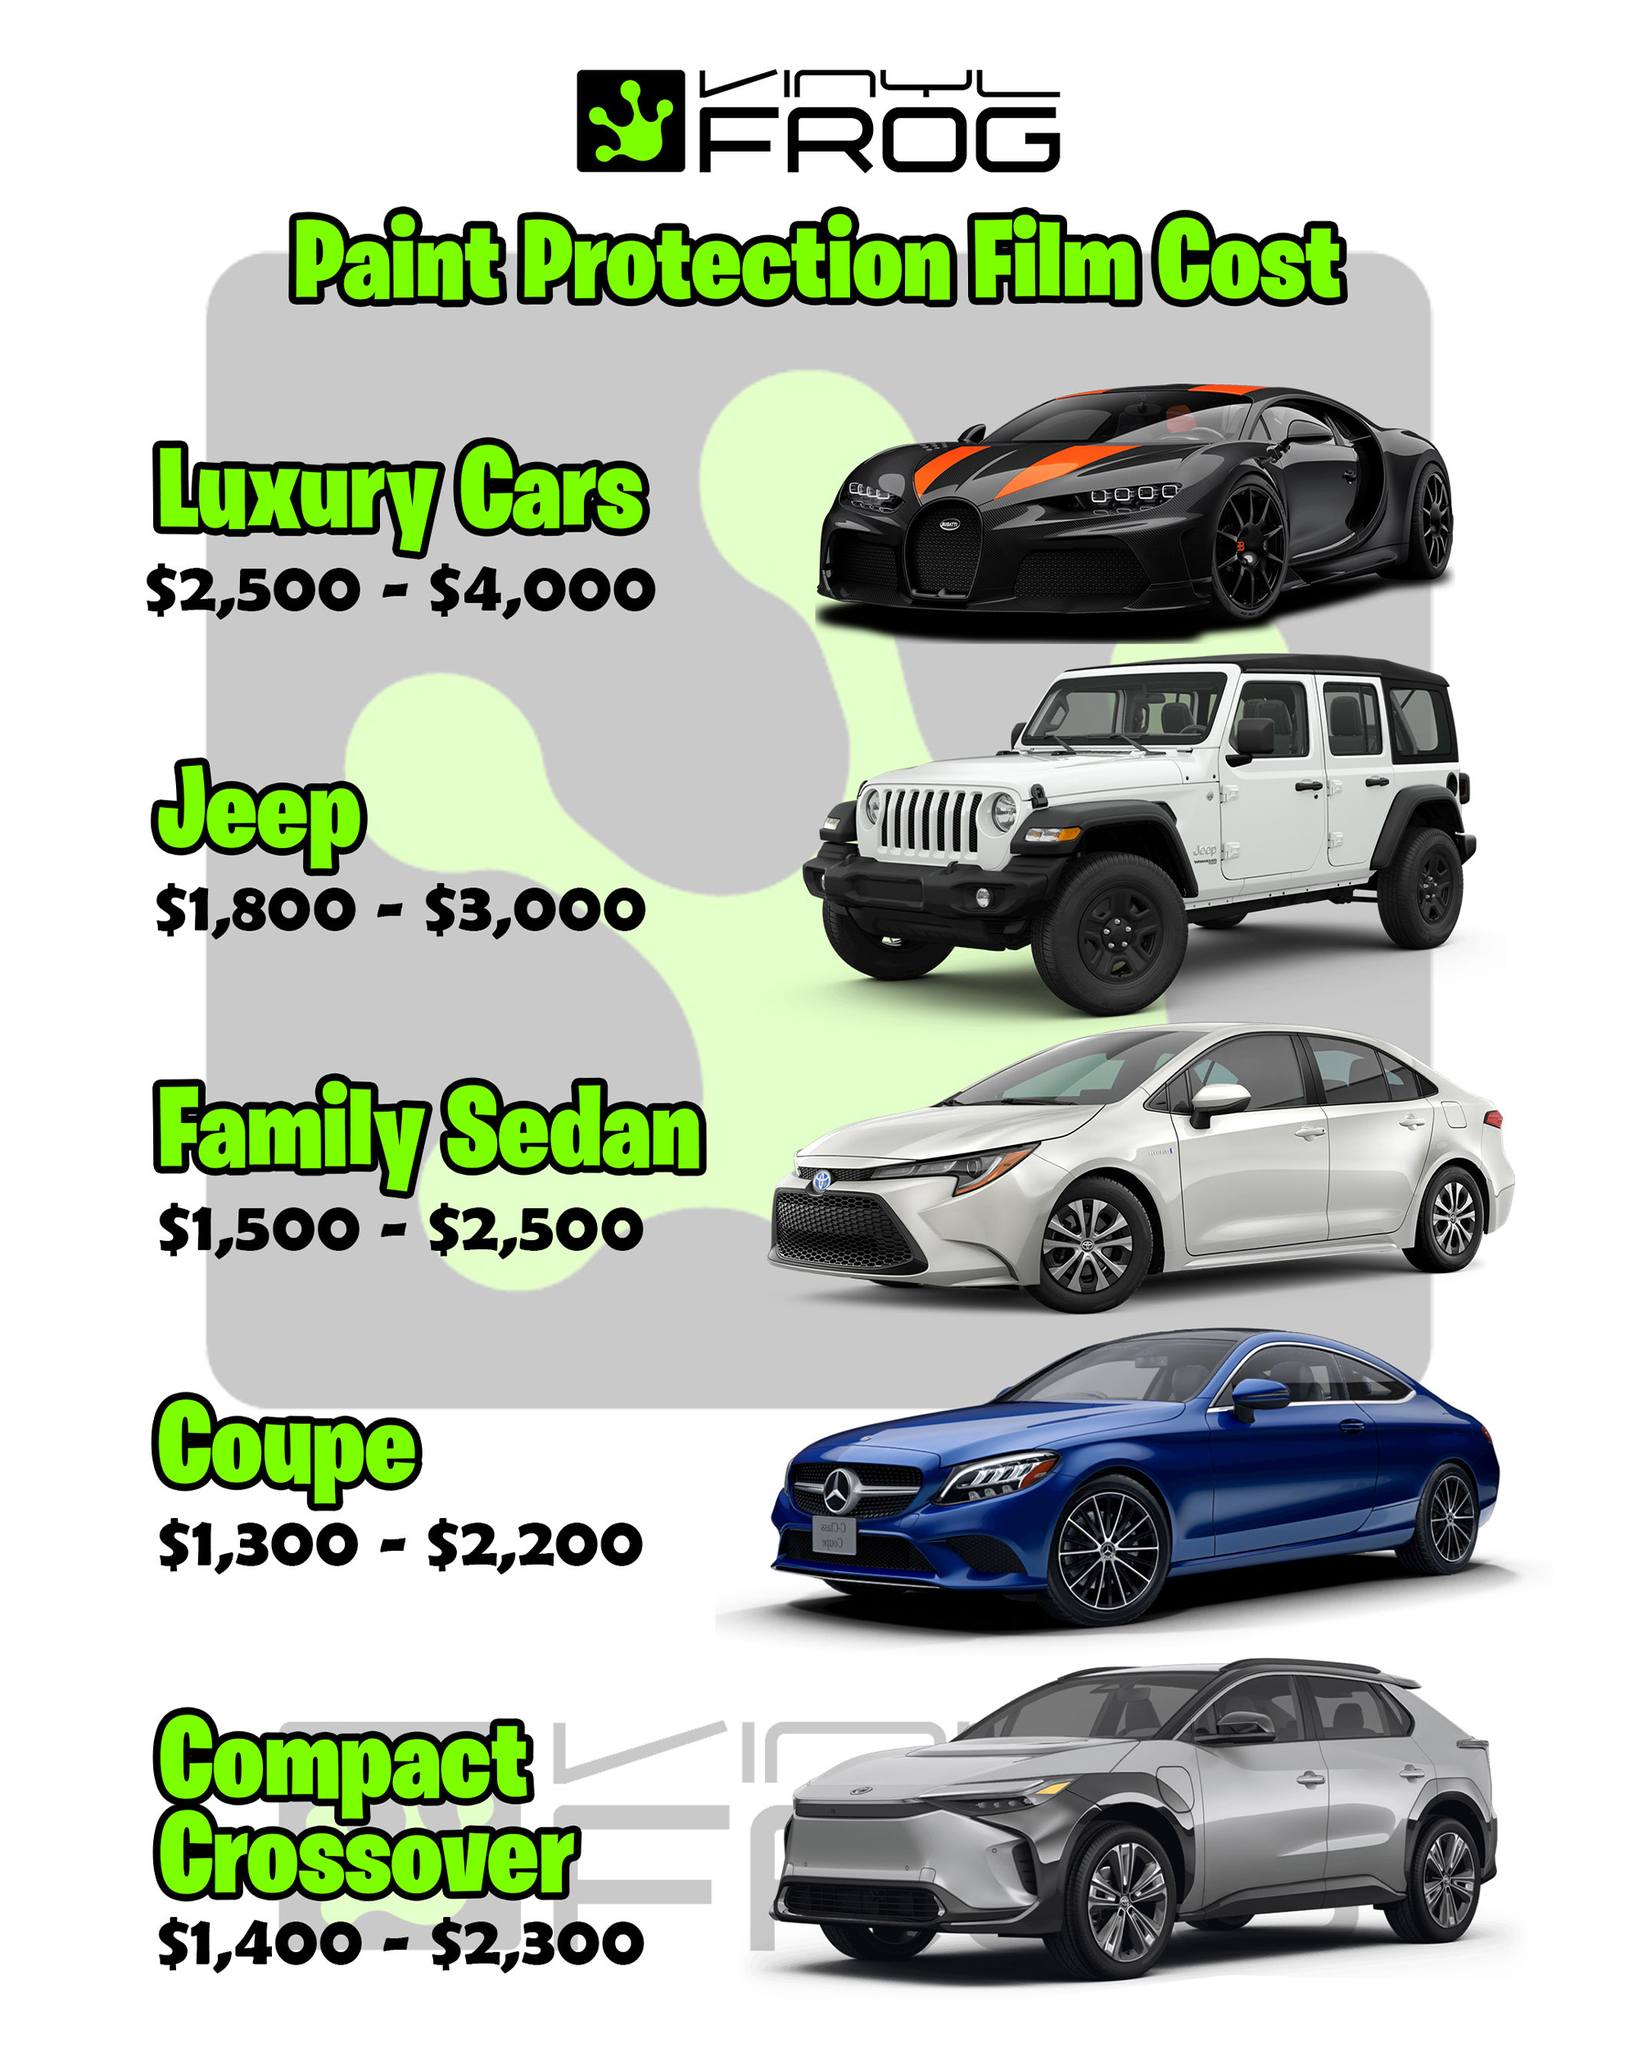 How Much Does  Paint Protection Film Cost?